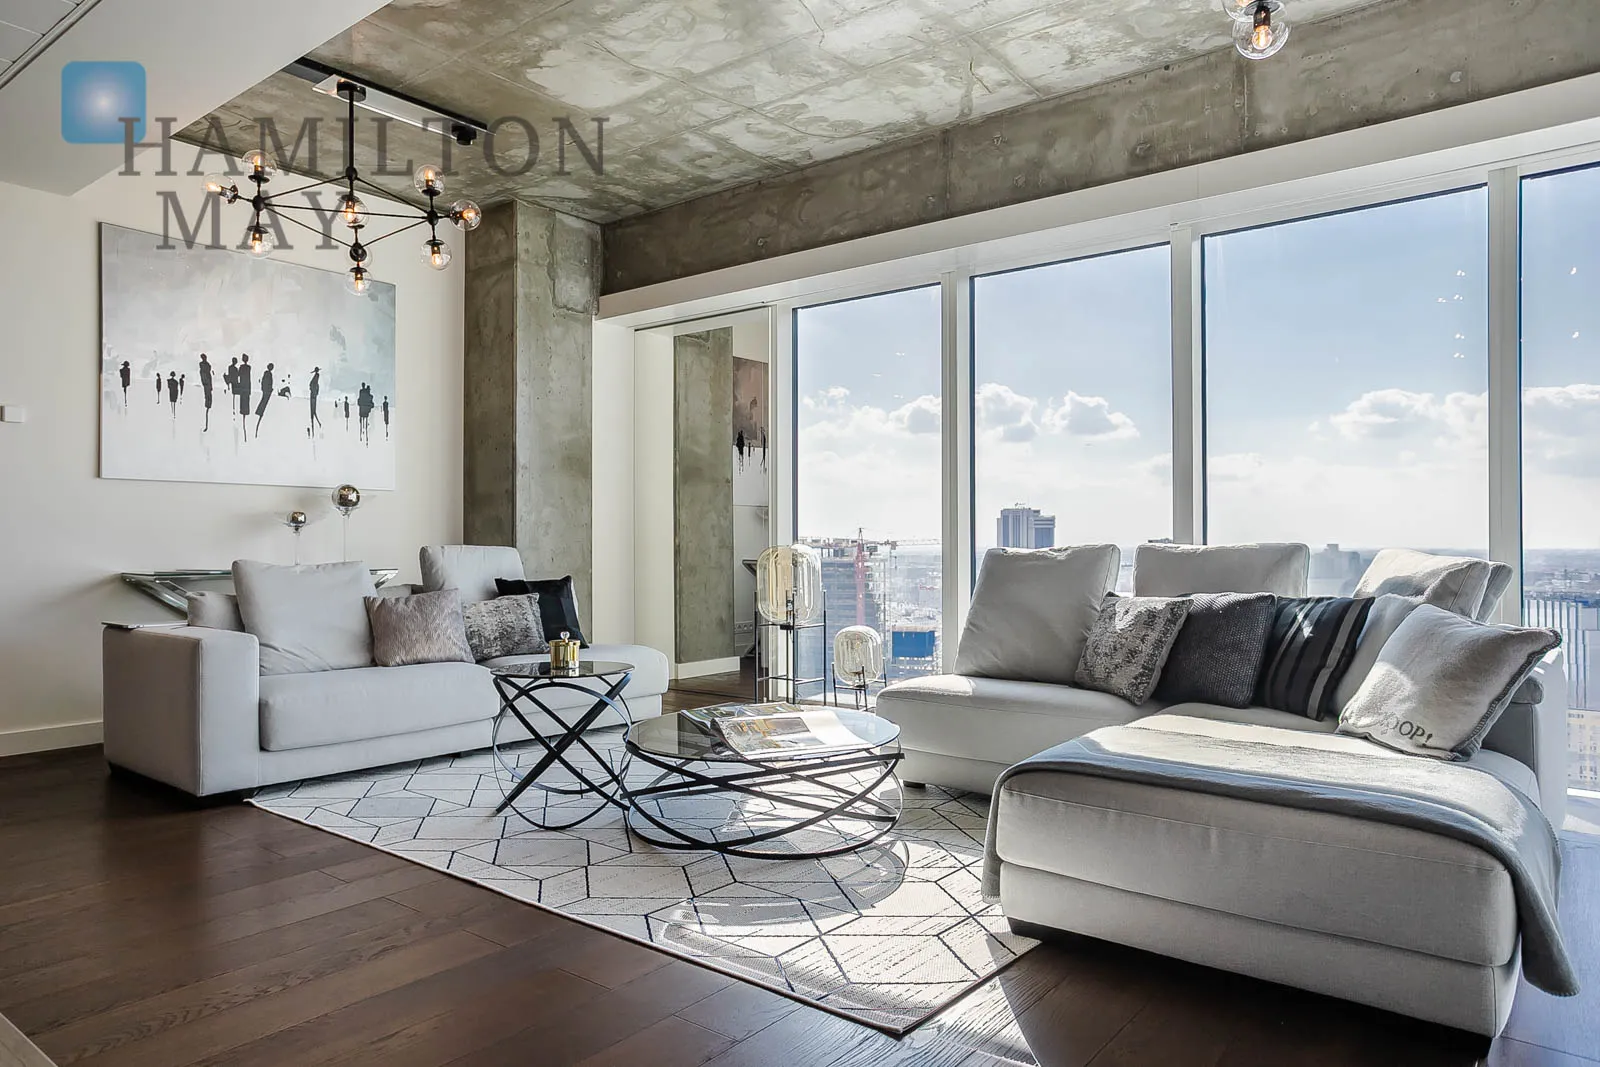 Stunning design and a spectacular view from the 23rd floor